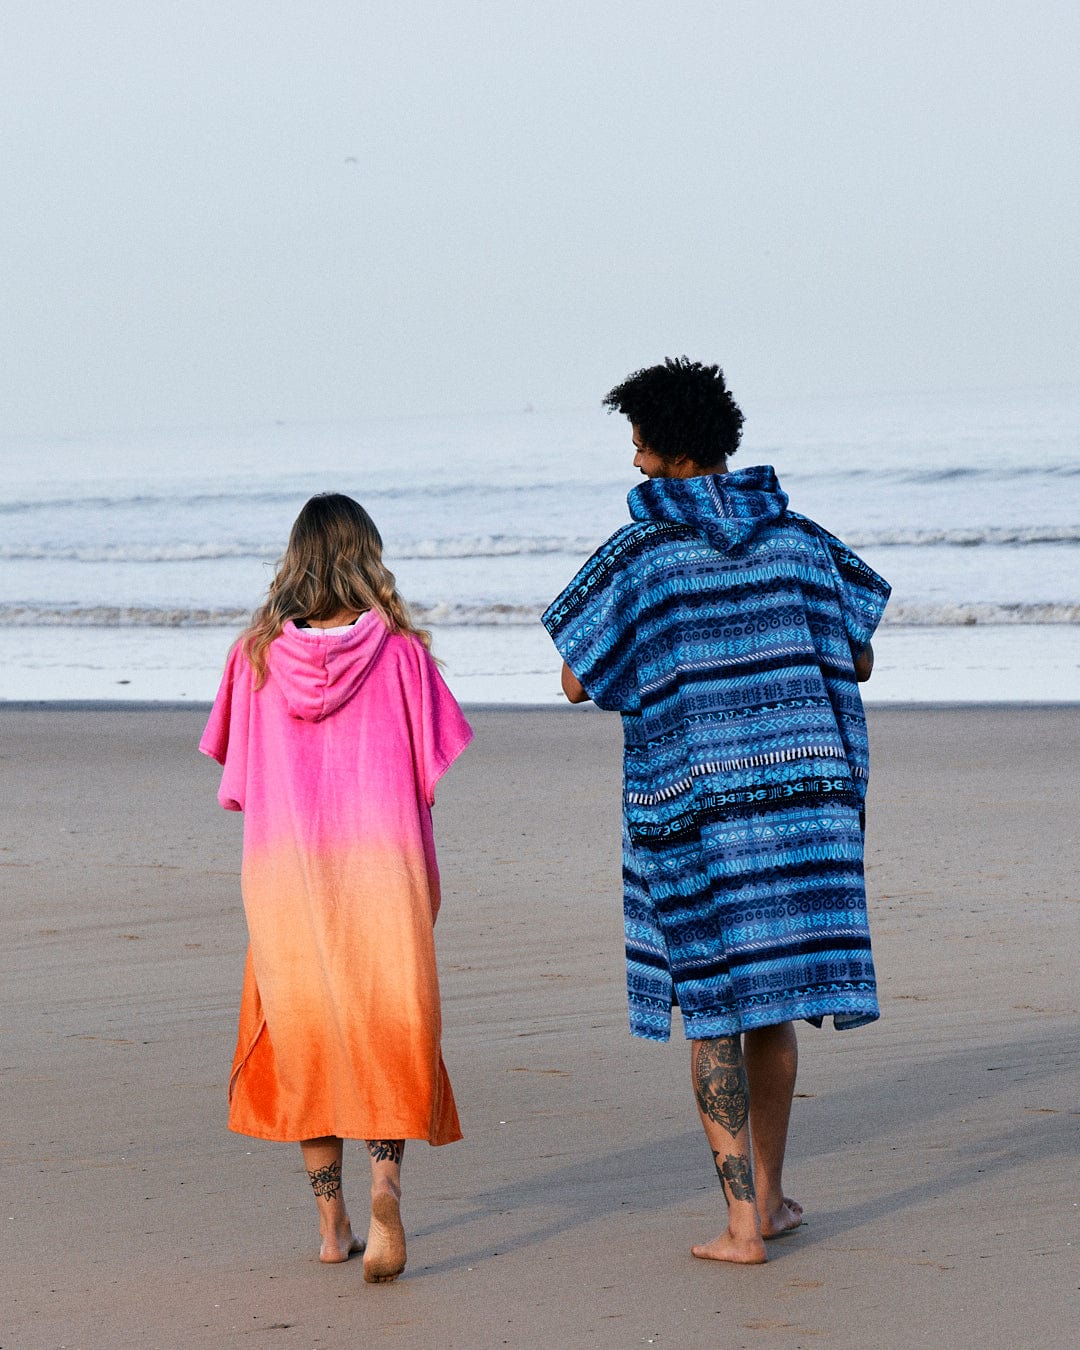 Two people wrapped in colorful, ultra-absorbent Saltrock Tropic Dip - Changing Towels in Pink/Orange walking on a beach, viewed from behind, with clear skies in the background.